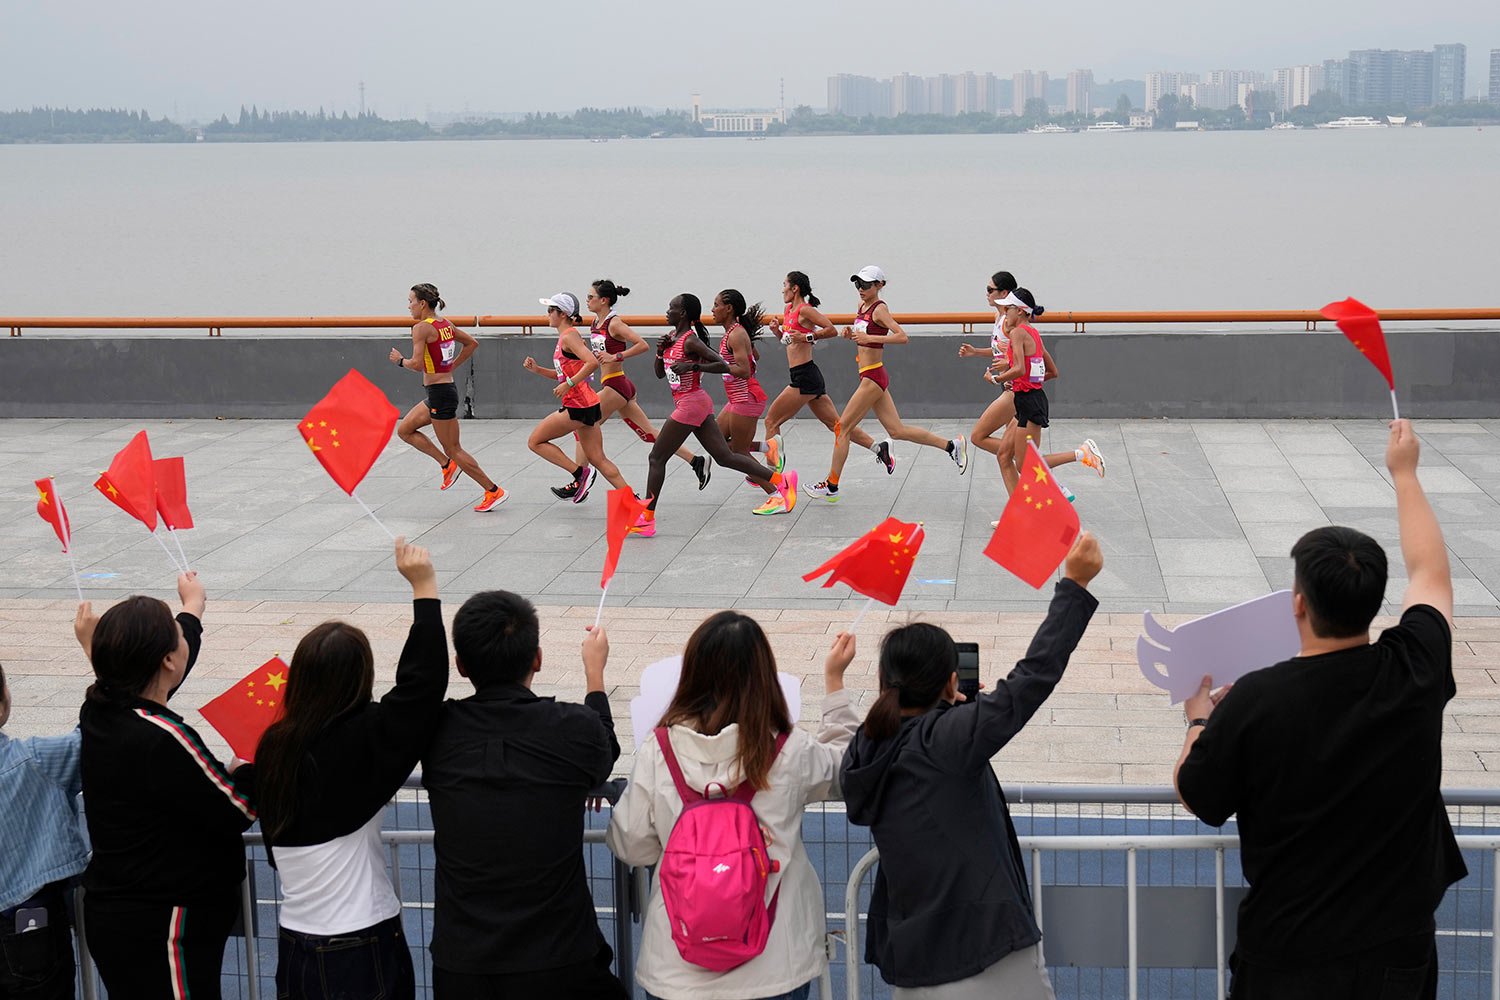  Spectators cheer as runners compete during the women's marathon at the 19th Asian Games in Hangzhou, China, Thursday, Oct. 5, 2023. (AP Photo/Aijaz Rahi) 